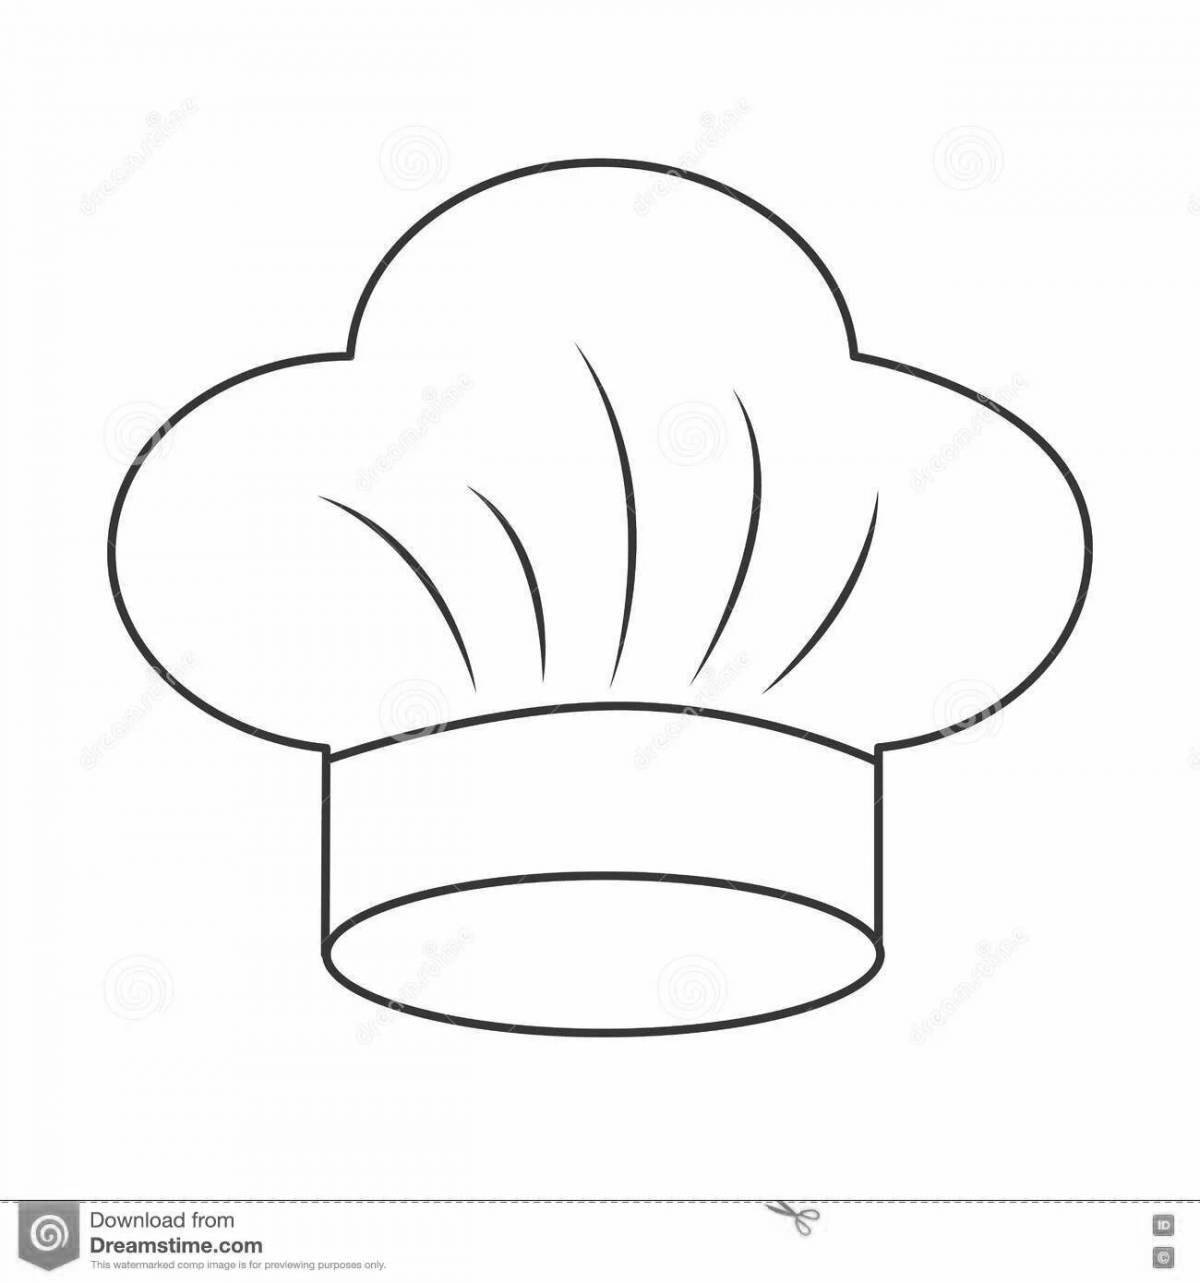 Coloring page fashionable chef's hat